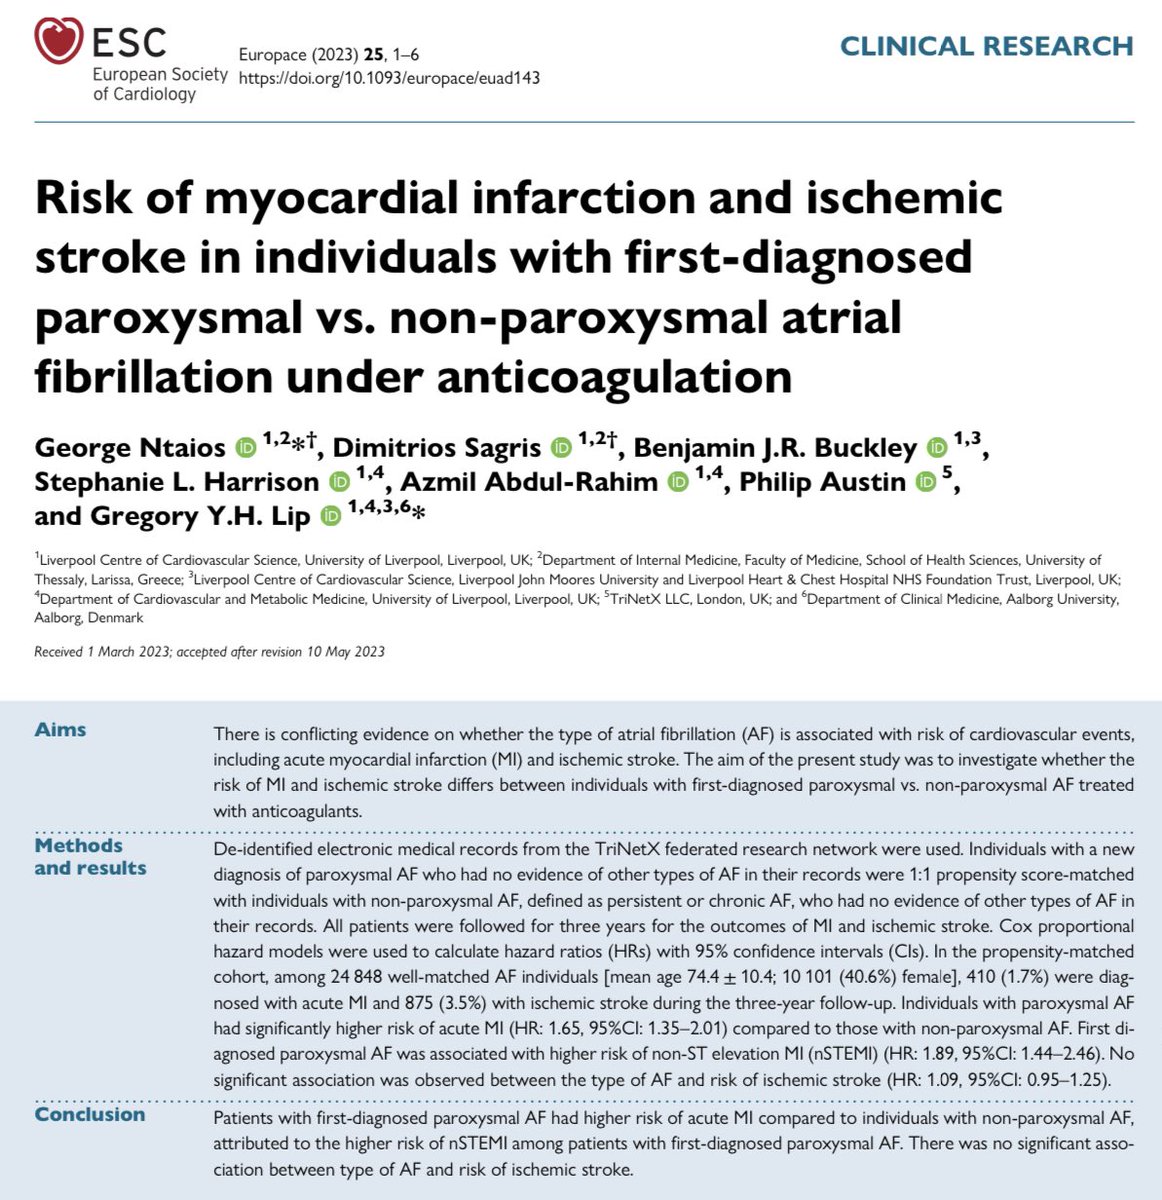 Risk of myocardial infarction and ischemic stroke in first-diagnosed paroxysmal vs. non-paroxysmal AF under anticoagulation

N=24,848 well-matched AF Pts

🔹 similar i stroke rate
🔹PAF ⤴️ NSTEMI🤔
🔹perAF ⤴️ death 

Ntaios et al @ESC_Journals @EuropaceEiC 

cited…